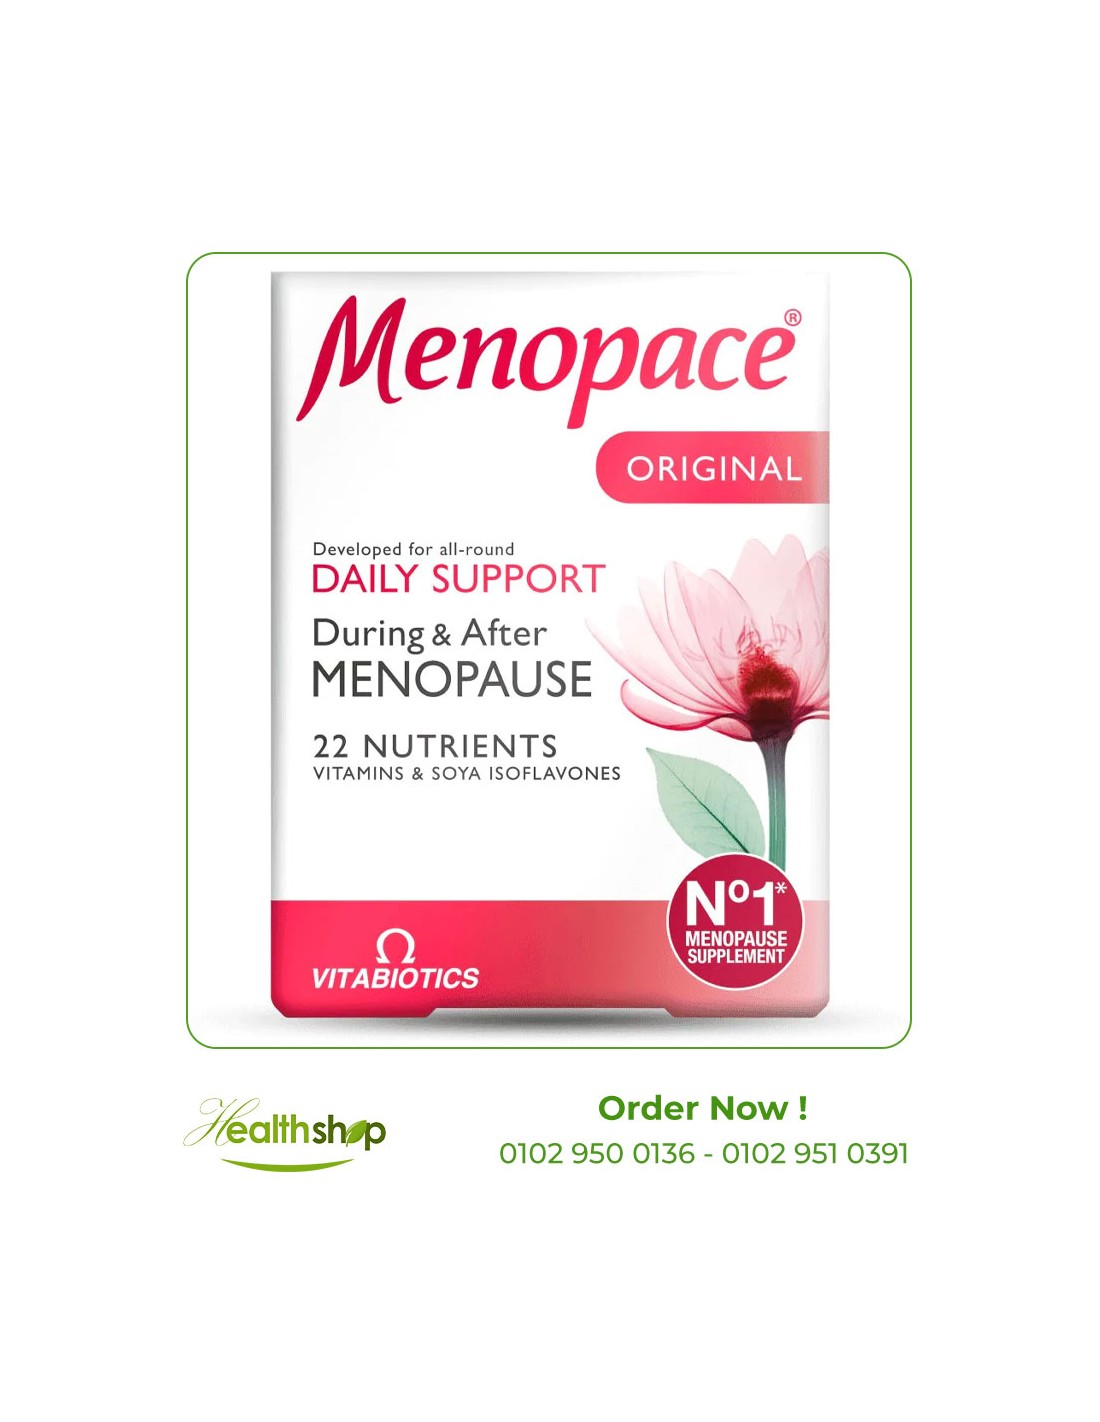 Learn now about the benefits and prices of Menopas Original in Egypt